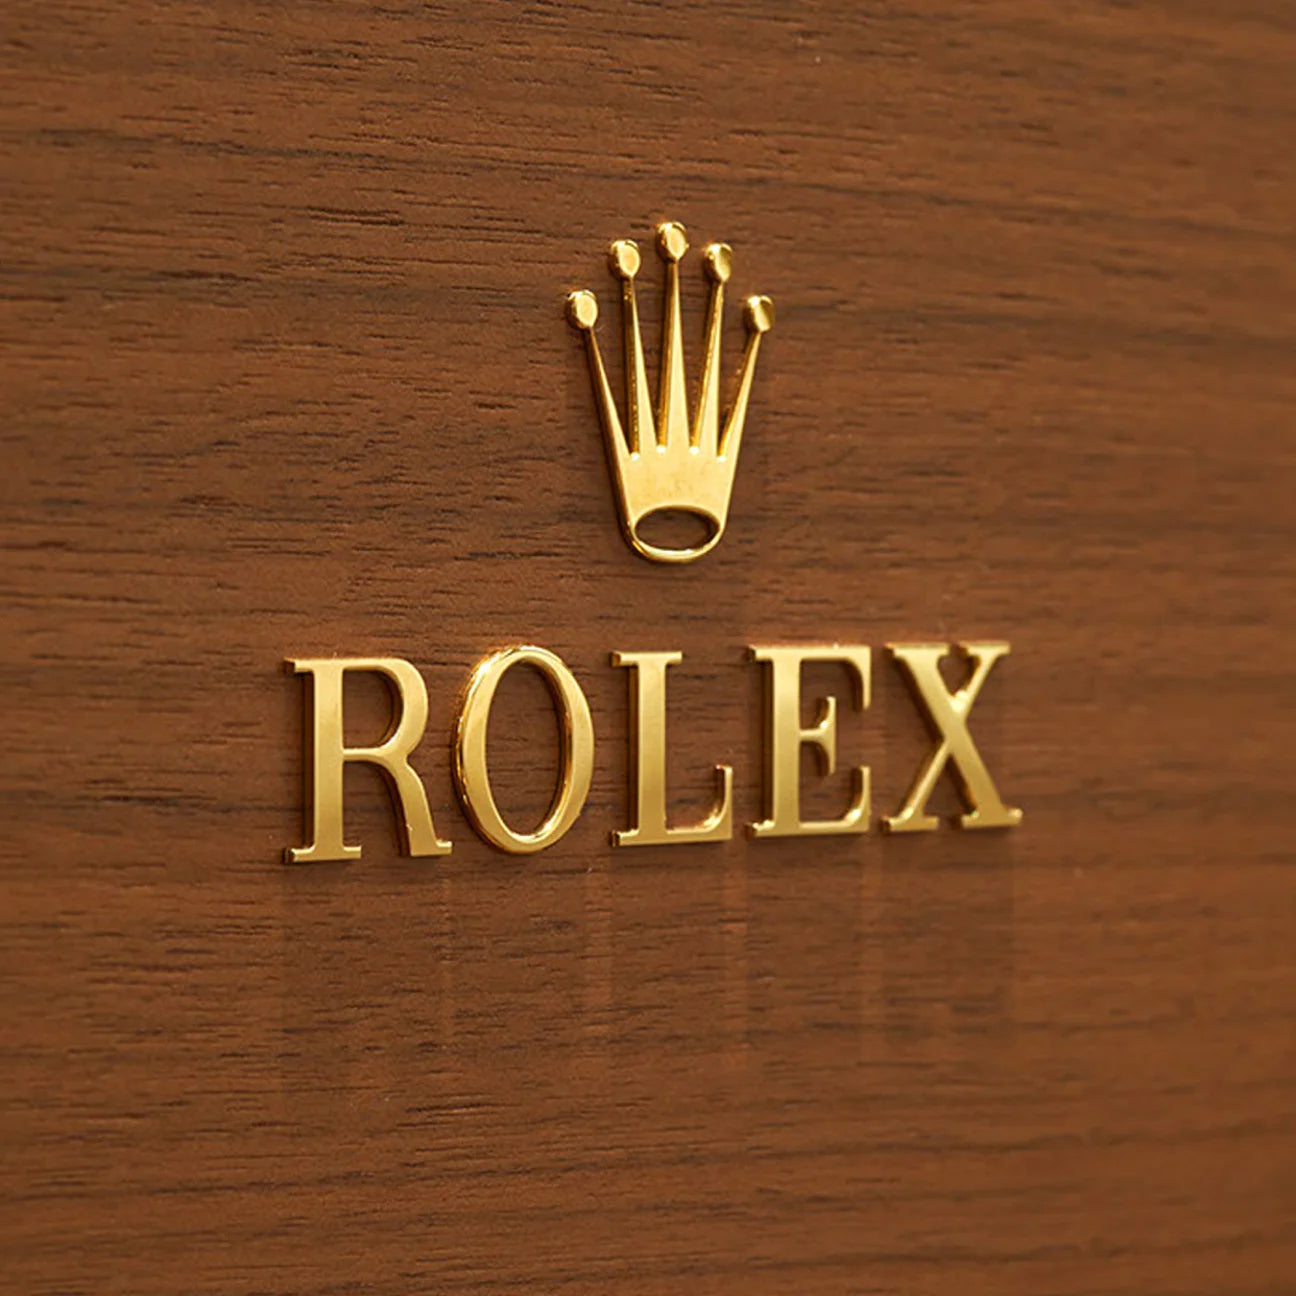 Rolex history at Orr's Jewelers in Sewickley, PA